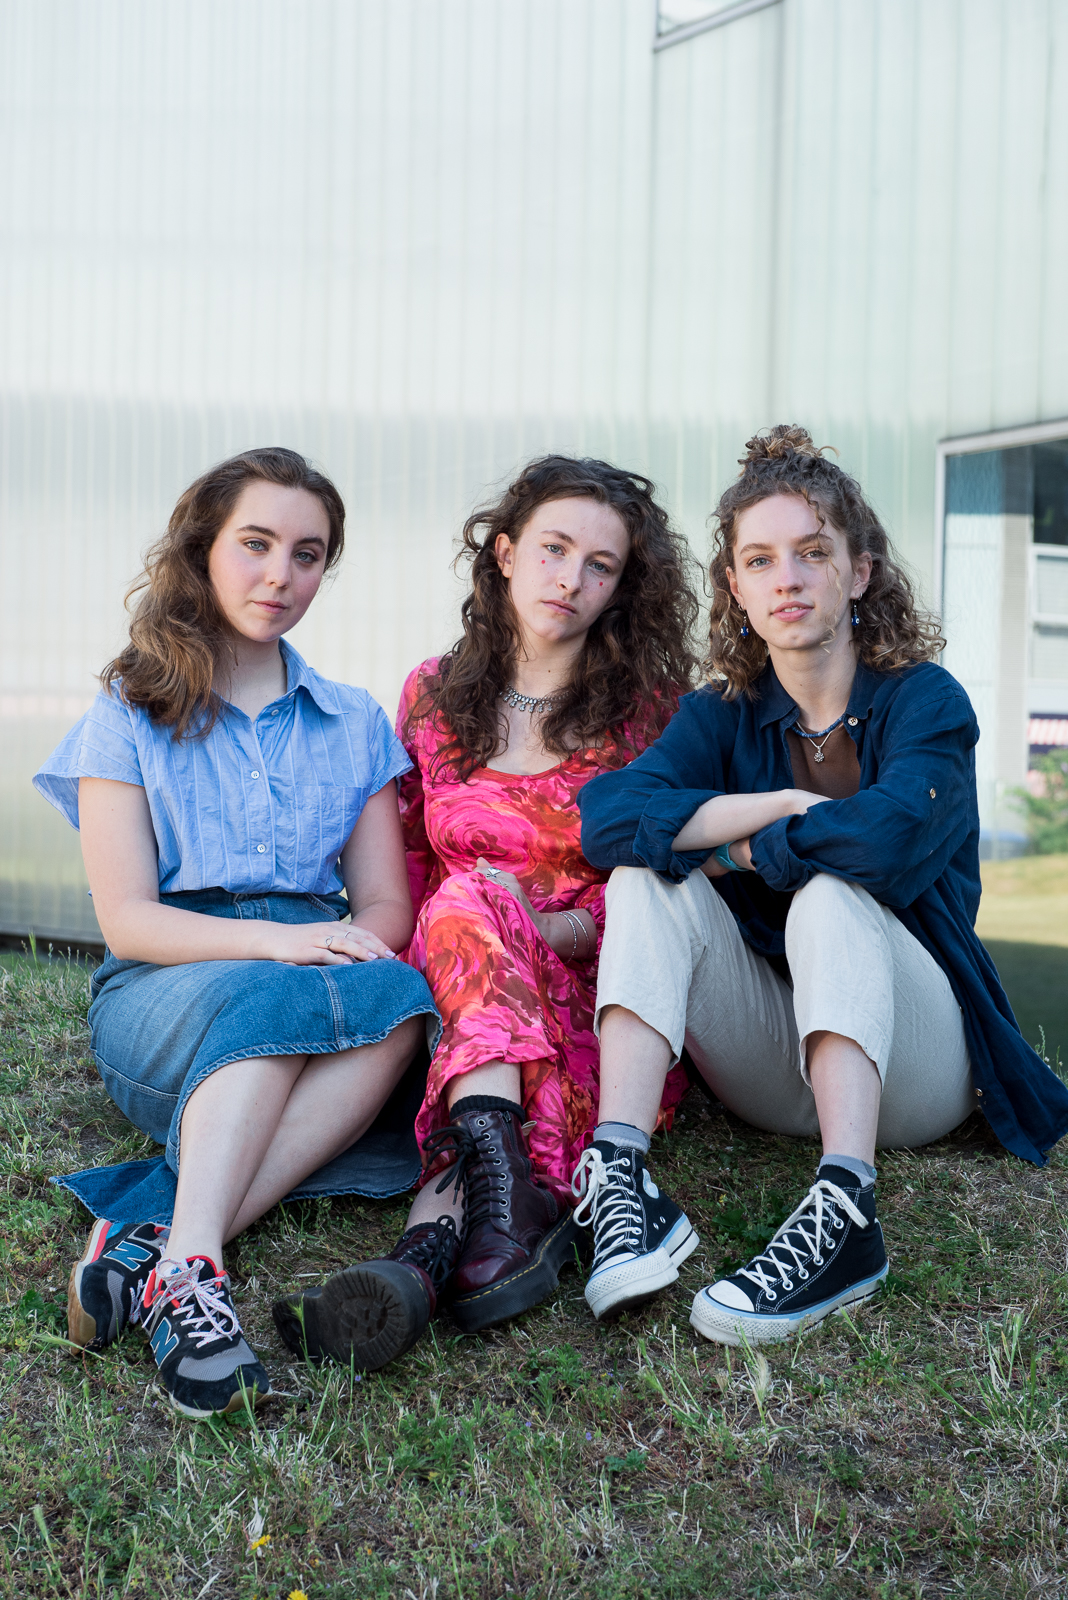 Ruby De Ville Morel, Mila Fernandez and Melissa Heywood sitting together in a row on a grassy bank.